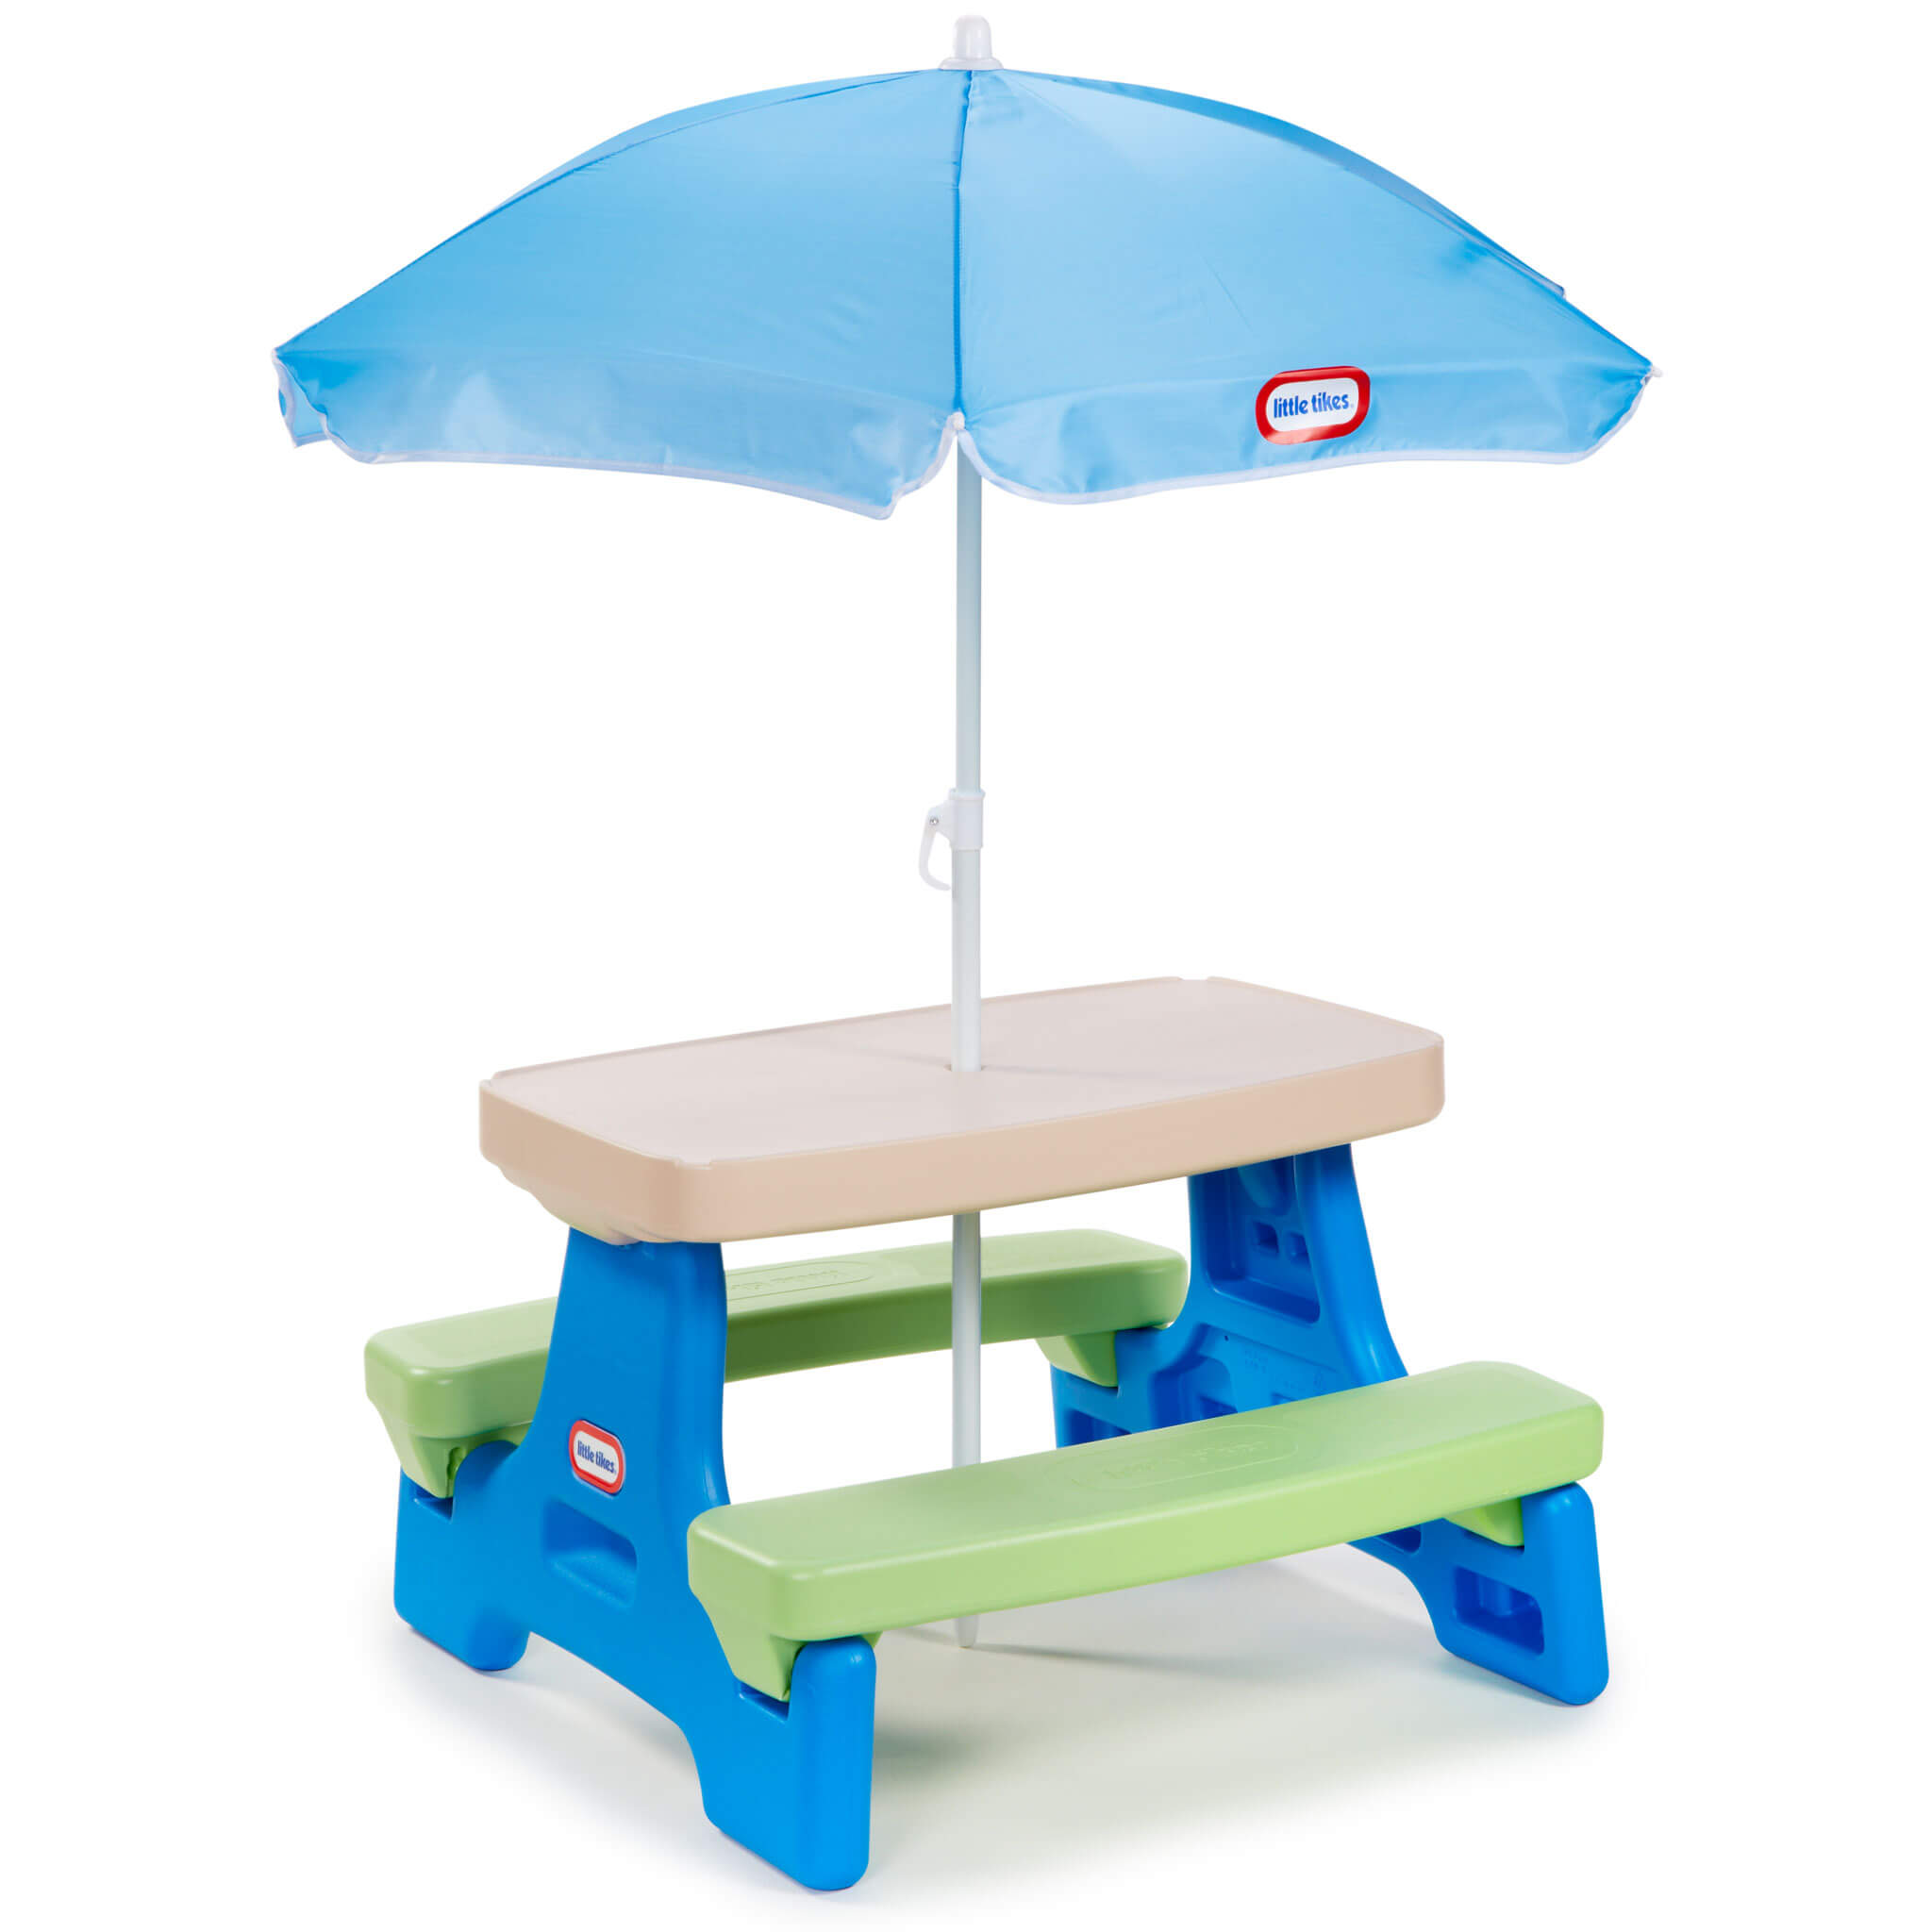 Little Tikes Easy Store Jr. Picnic Table With Umbrella